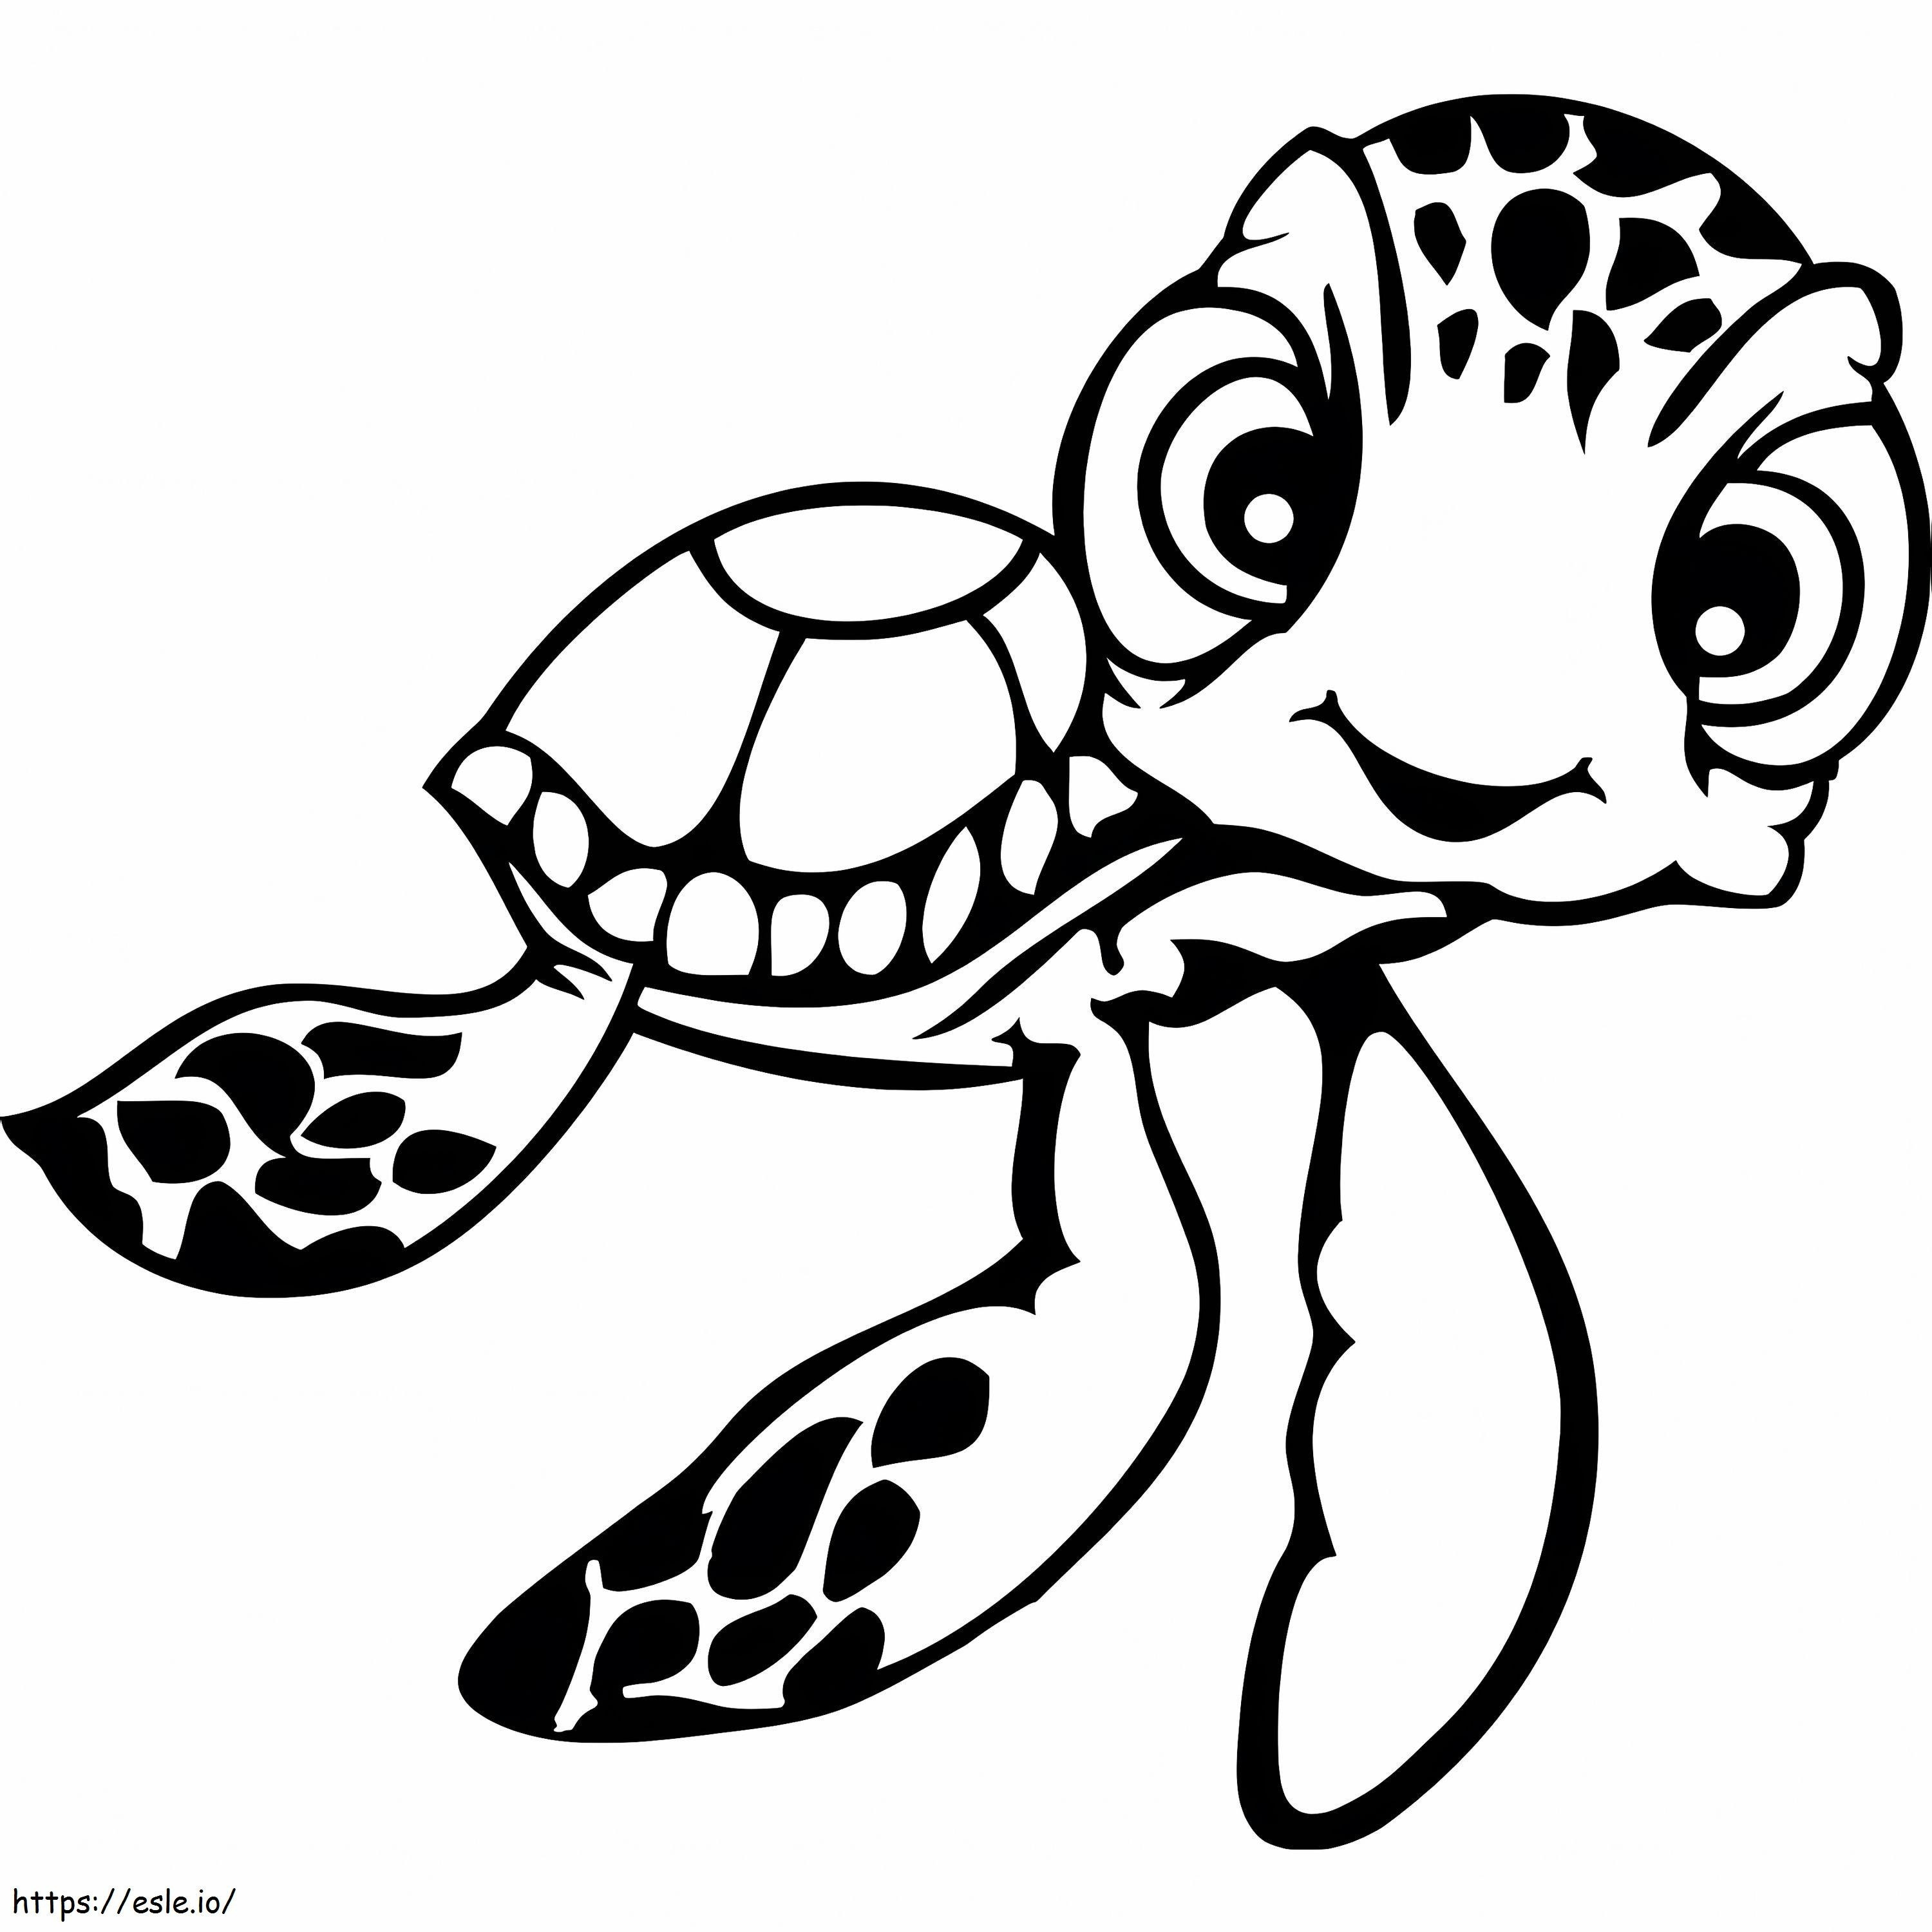 Squirt In Finding Nemo coloring page